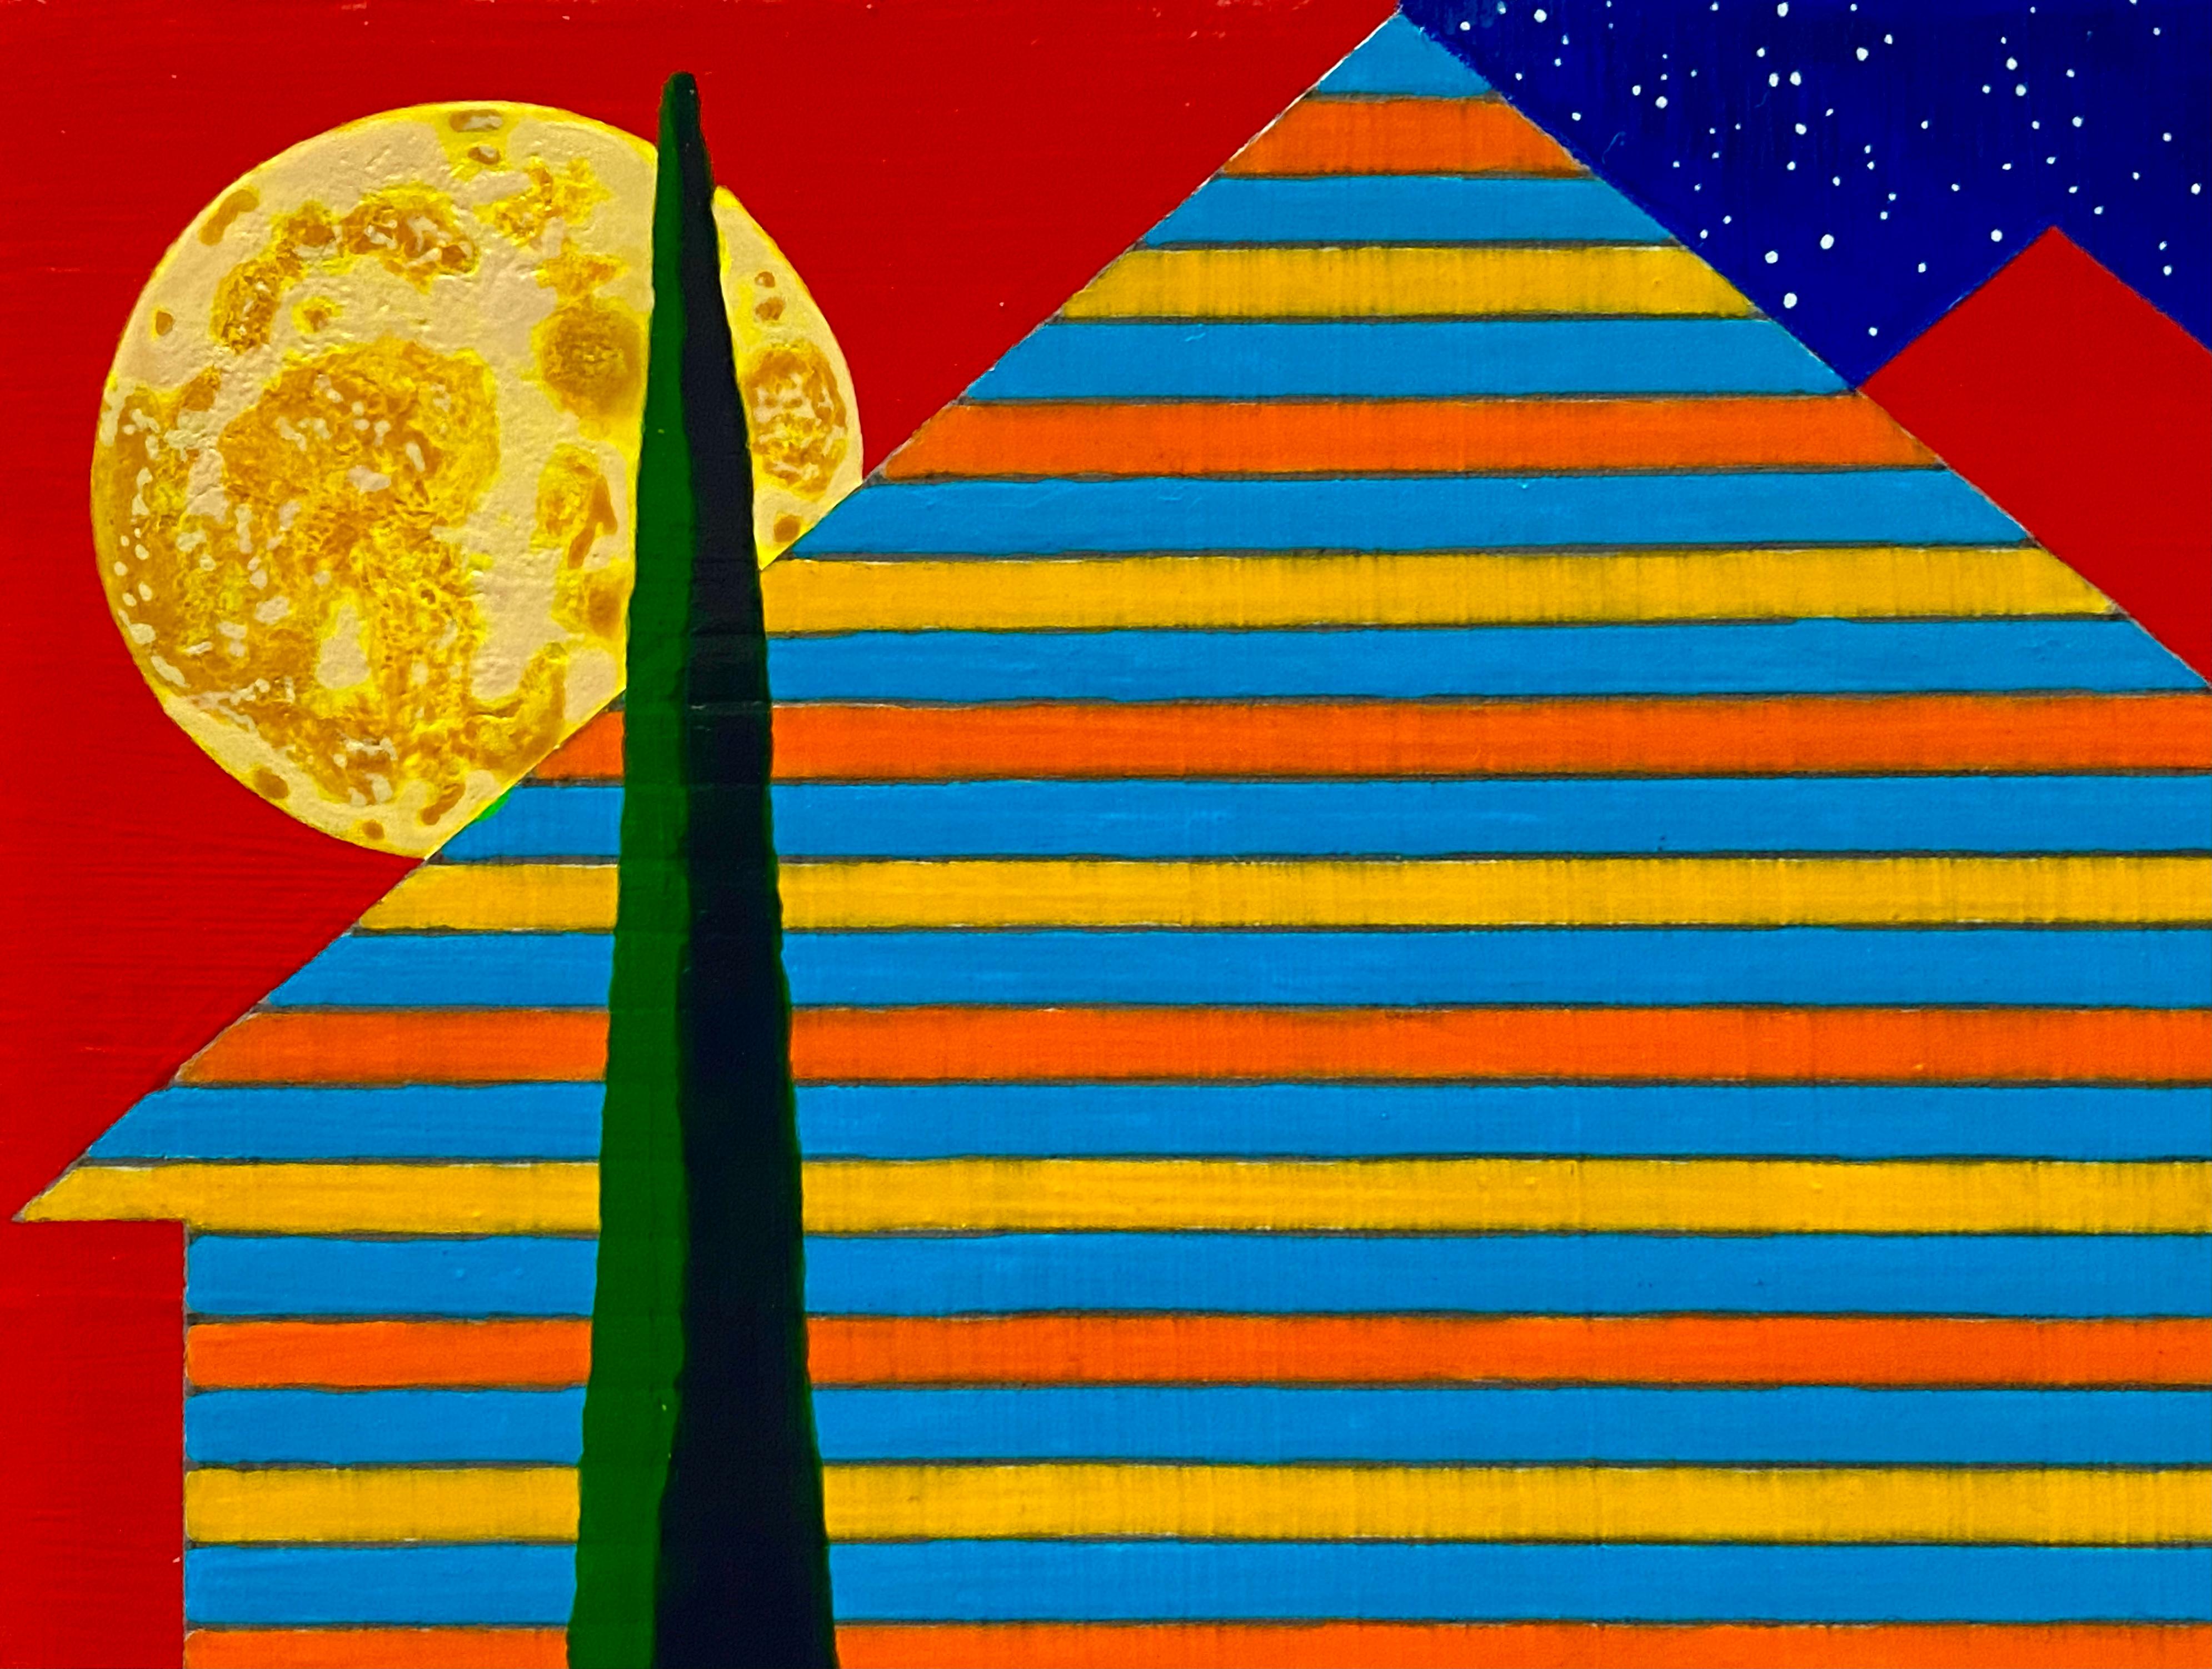 Interstice, small striped house against blue and red skies, painting on panel - Painting by James Isherwood